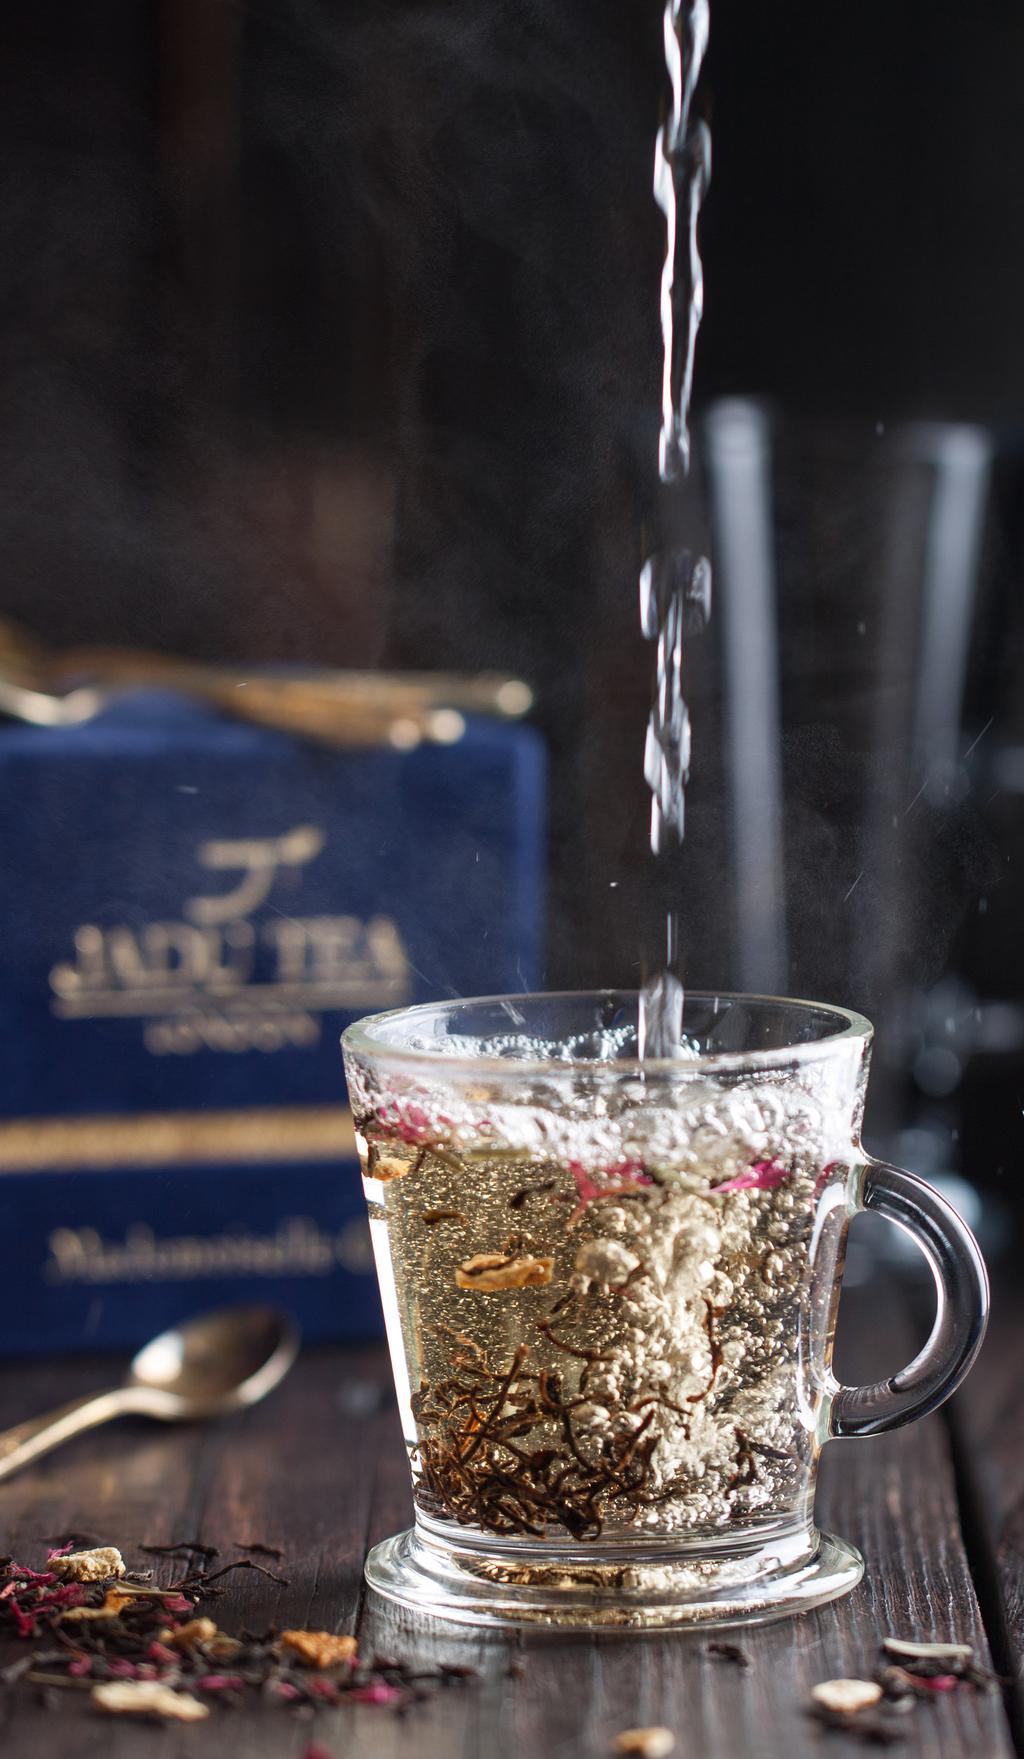 Chinese white tea, Hibiscus, Pineapple pieces, Corinths, Limeleaves, Papaya pieces, Sugar, Sunflower petals, Flavour Mademoiselle Grey Our flirtatious take on the classic favourite Earl Grey uses